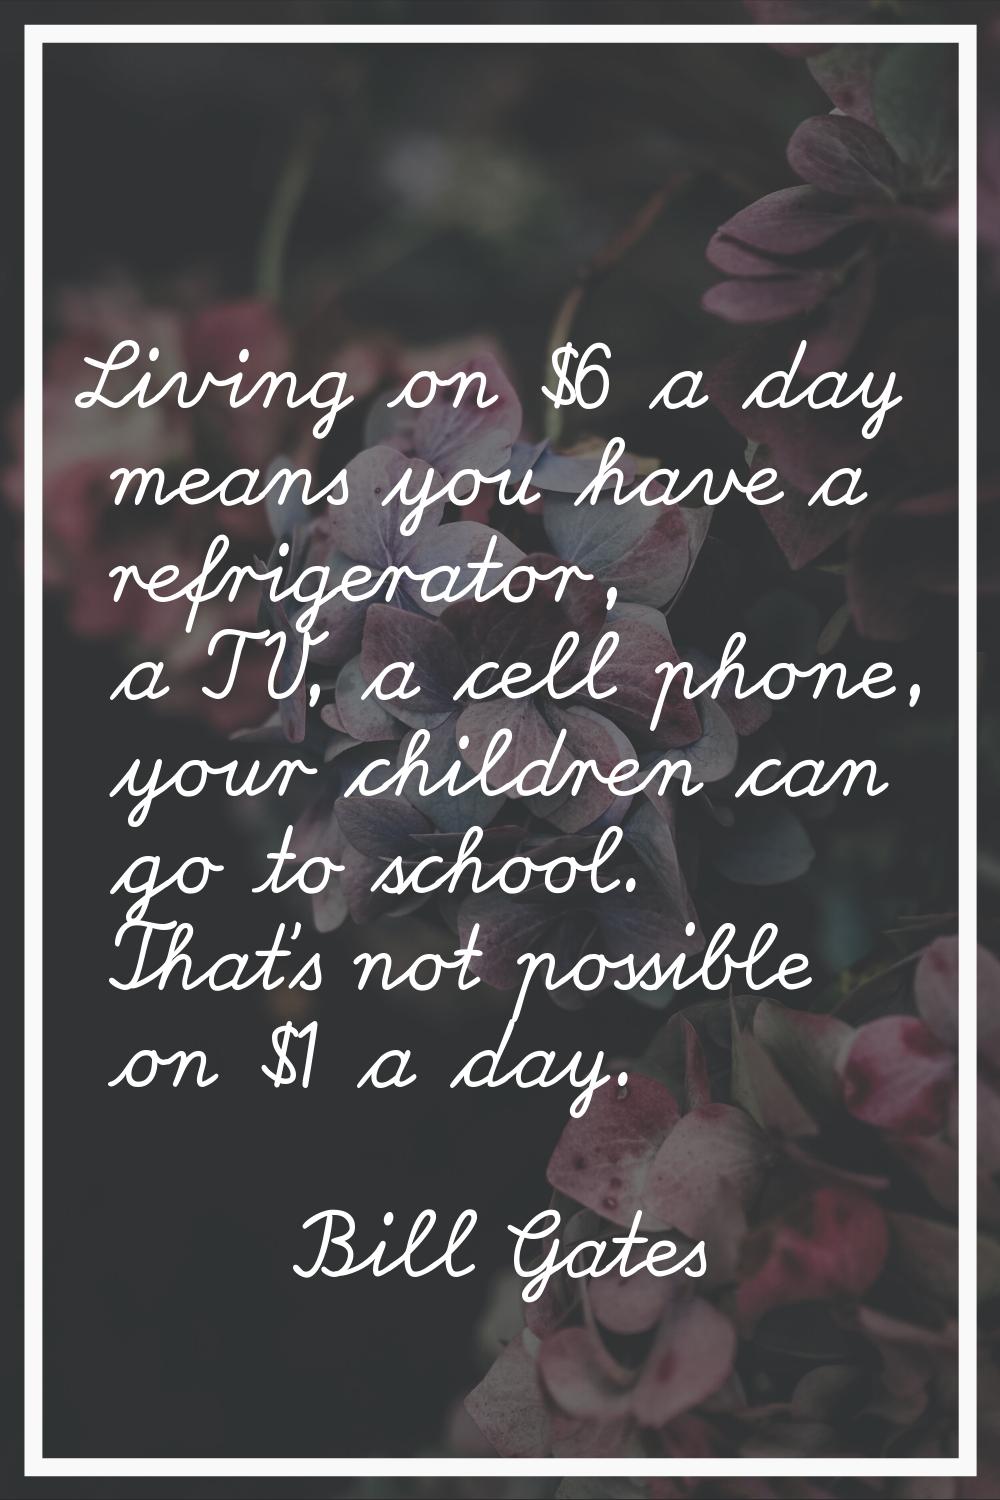 Living on $6 a day means you have a refrigerator, a TV, a cell phone, your children can go to schoo